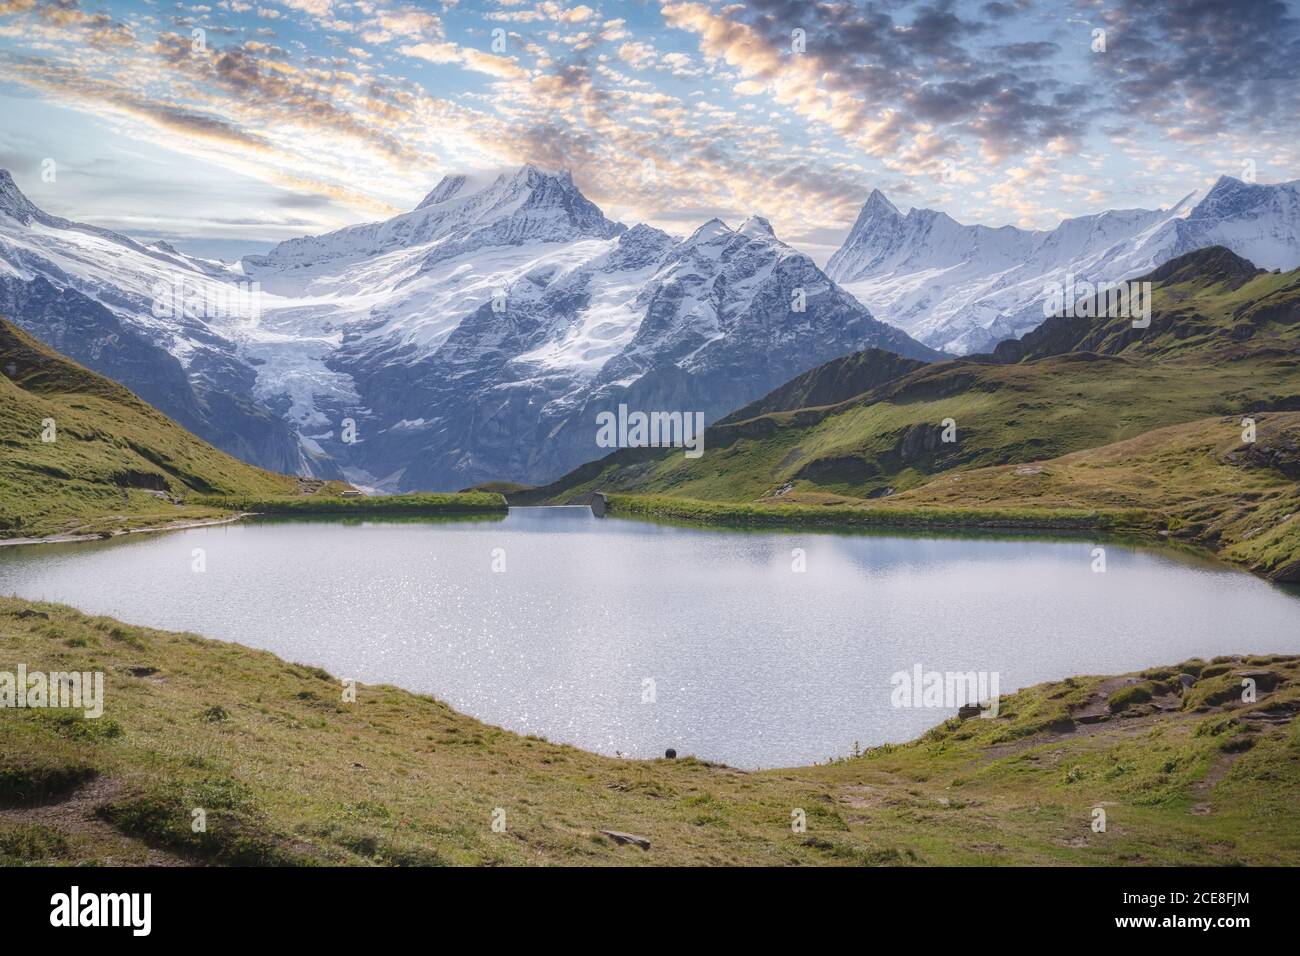 Breathtaking view of small pond with rippled water surrounded by green hills and snowy ridge under blue sky with clouds in afternoon Stock Photo